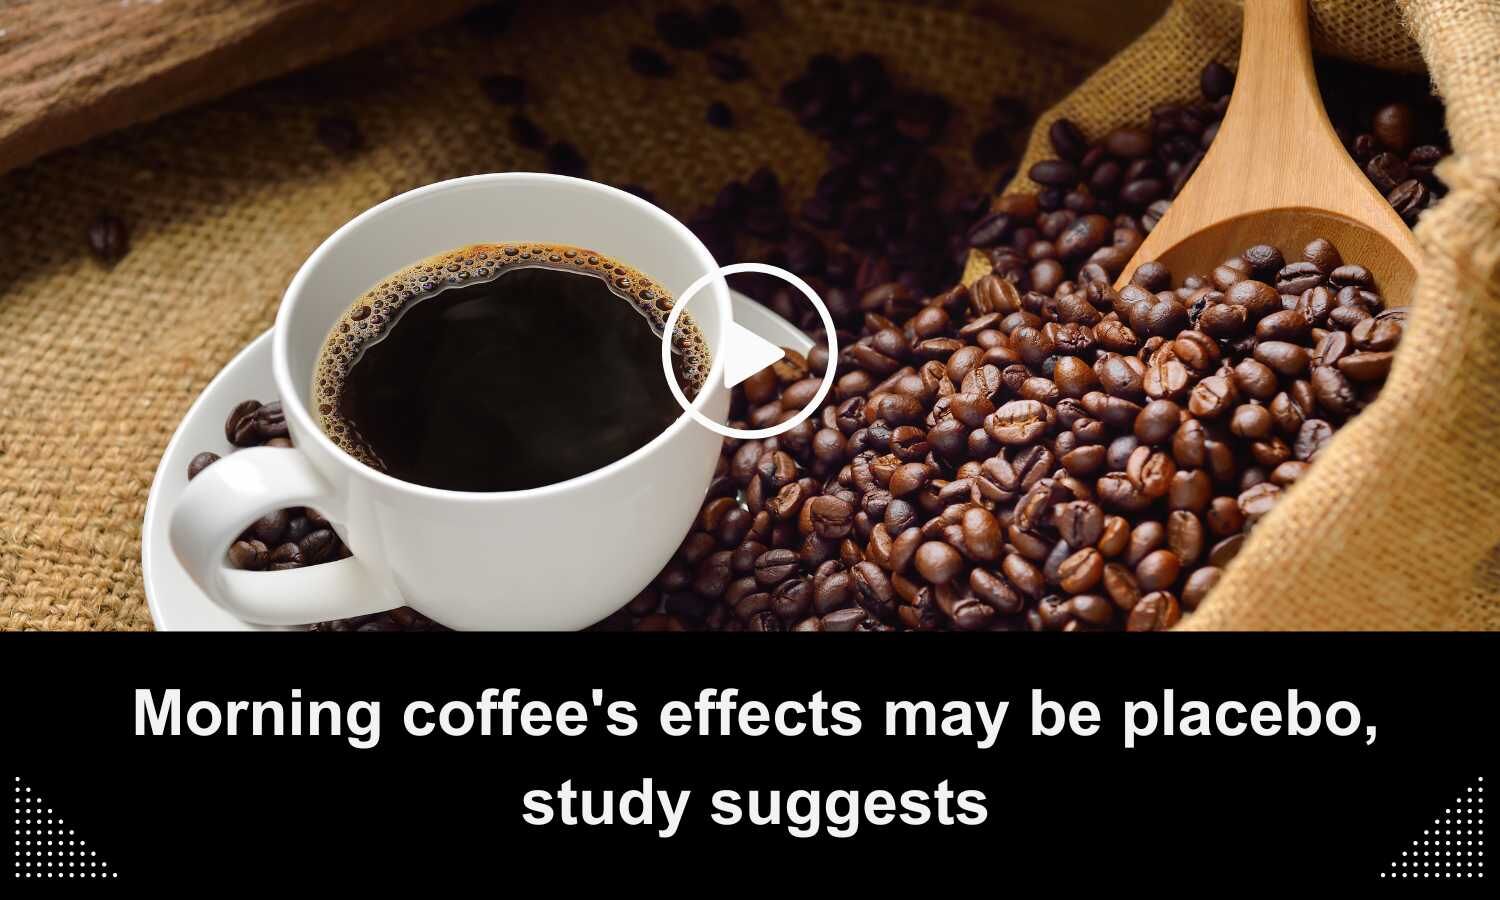 Morning coffee's effects may be placebo, study suggests